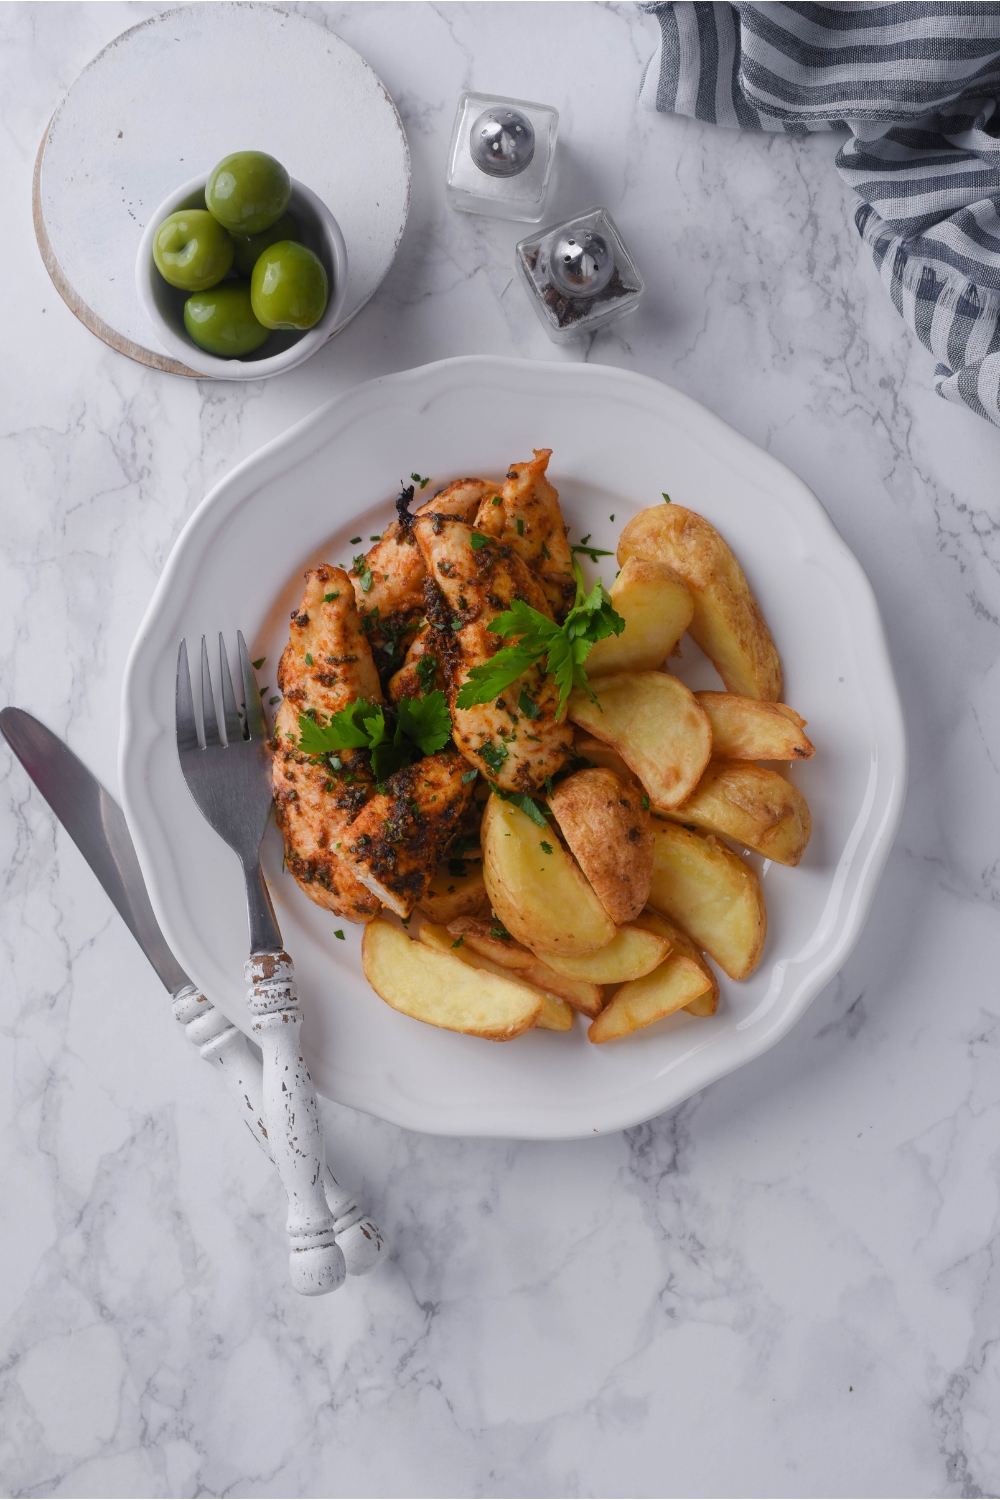 Baked chicken tenders on a white plate garnished with fresh herbs and served with a side of potato wedges. Surrounding the plate of chicken tenders are a fork, knife, salt and pepper shakers, and a small bowl of olives.